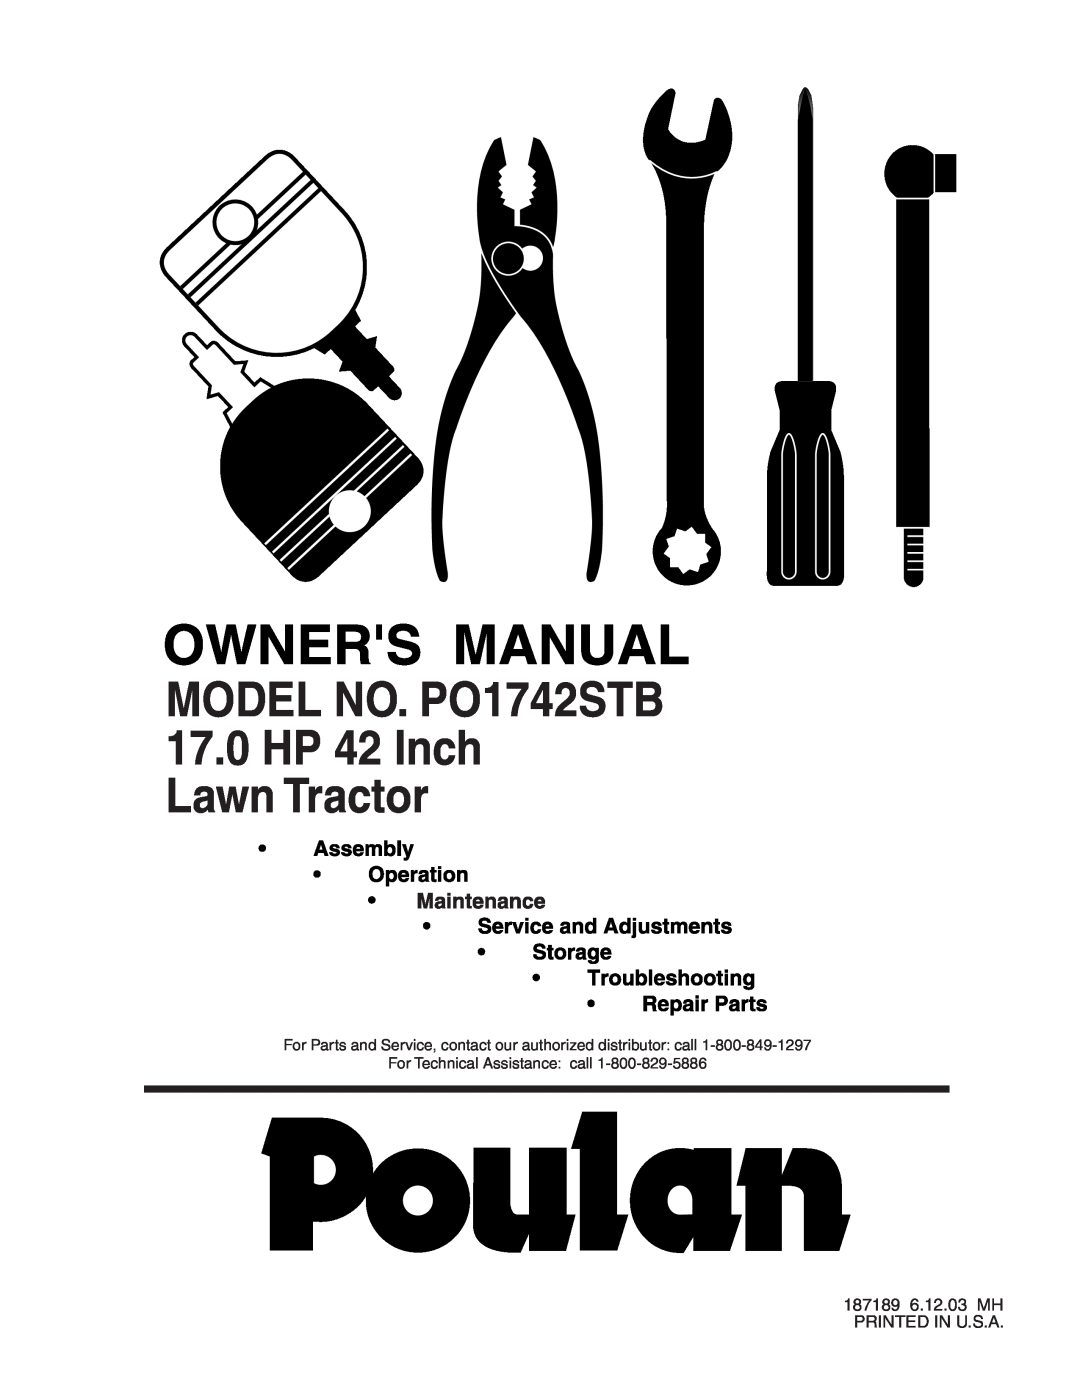 Poulan manual MODEL NO. PO1742STB 17.0HP 42 Inch Lawn Tractor, 187189 6.12.03 MH PRINTED IN U.S.A 